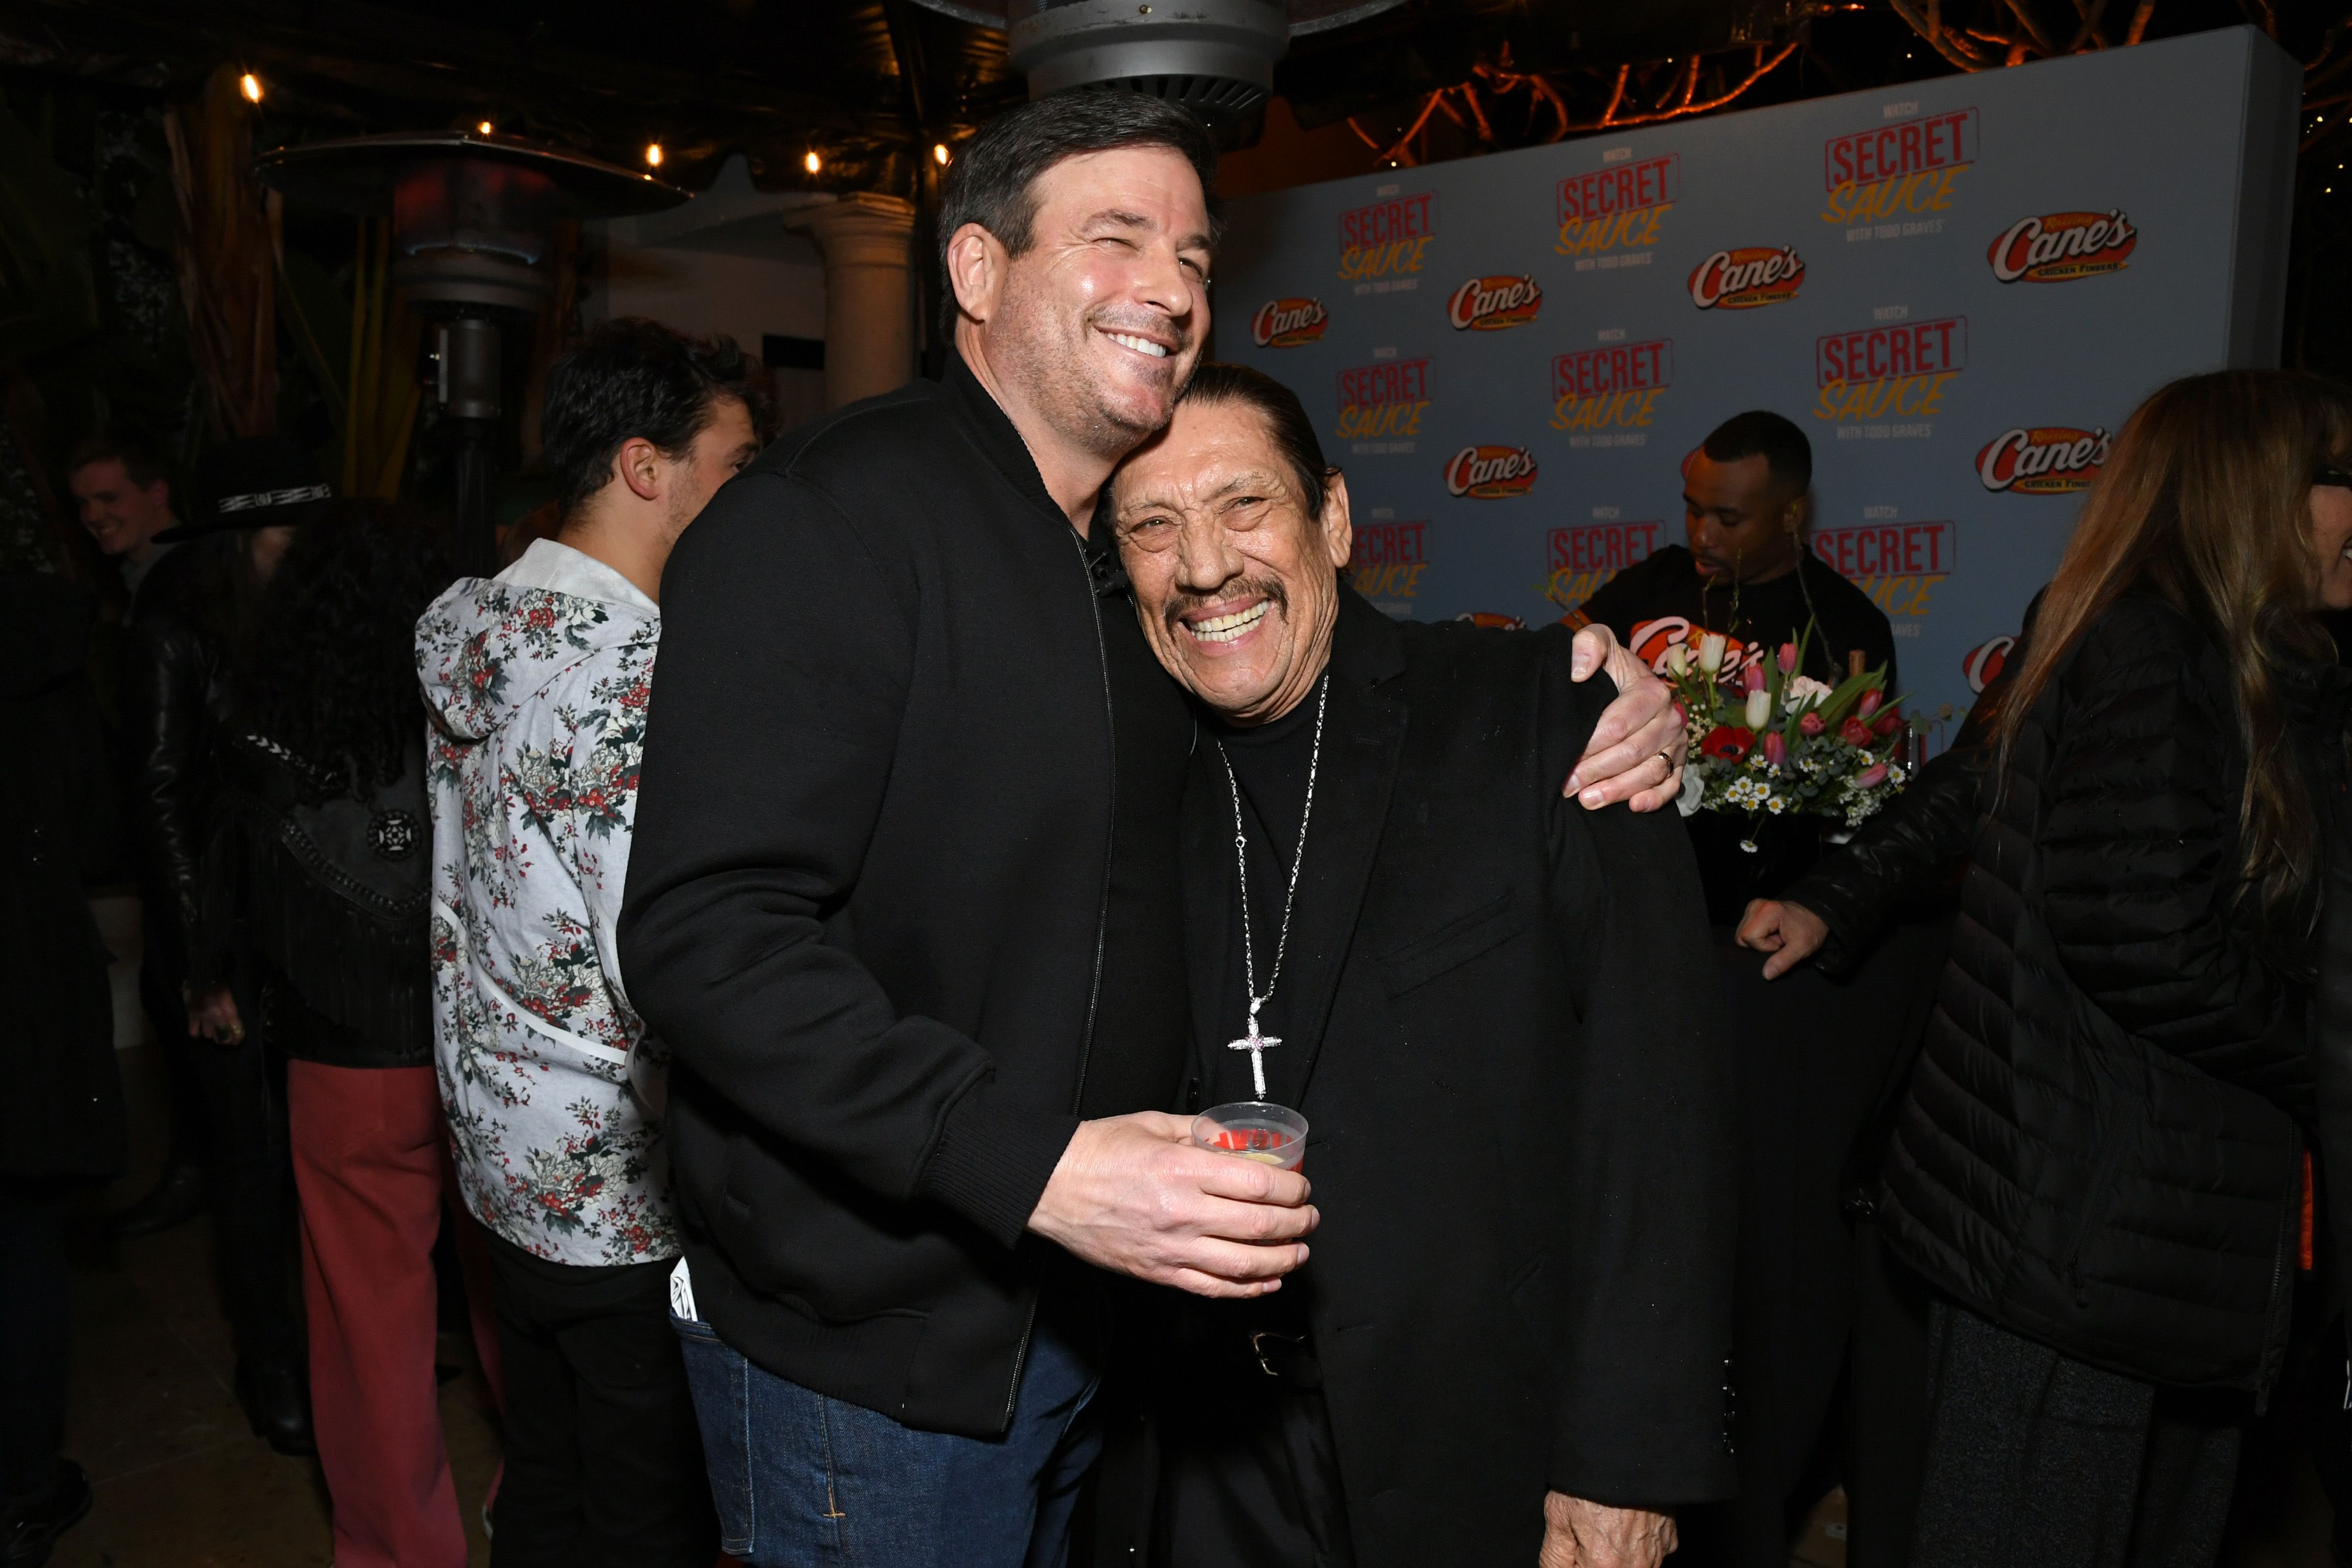 Photo shows Todd Graves and Danny Trejo hugging